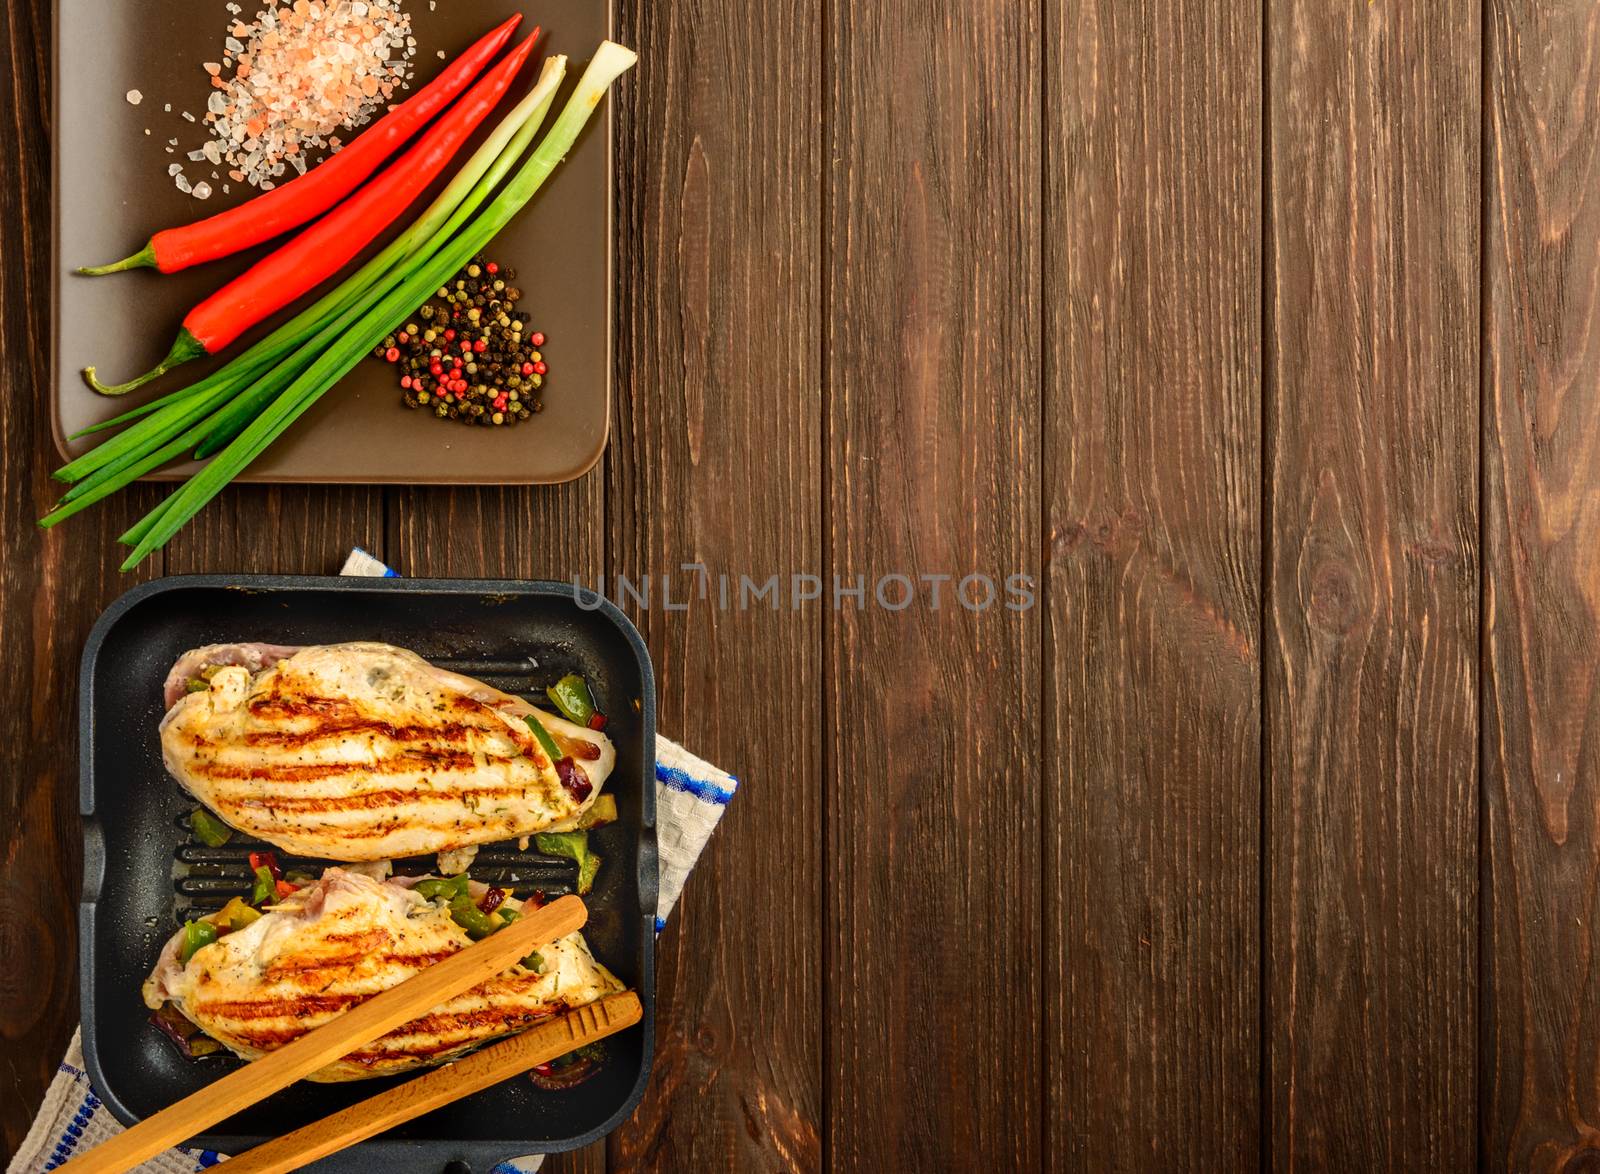 Chicken fillet and vegetables made on a grill. Top view by markova64el